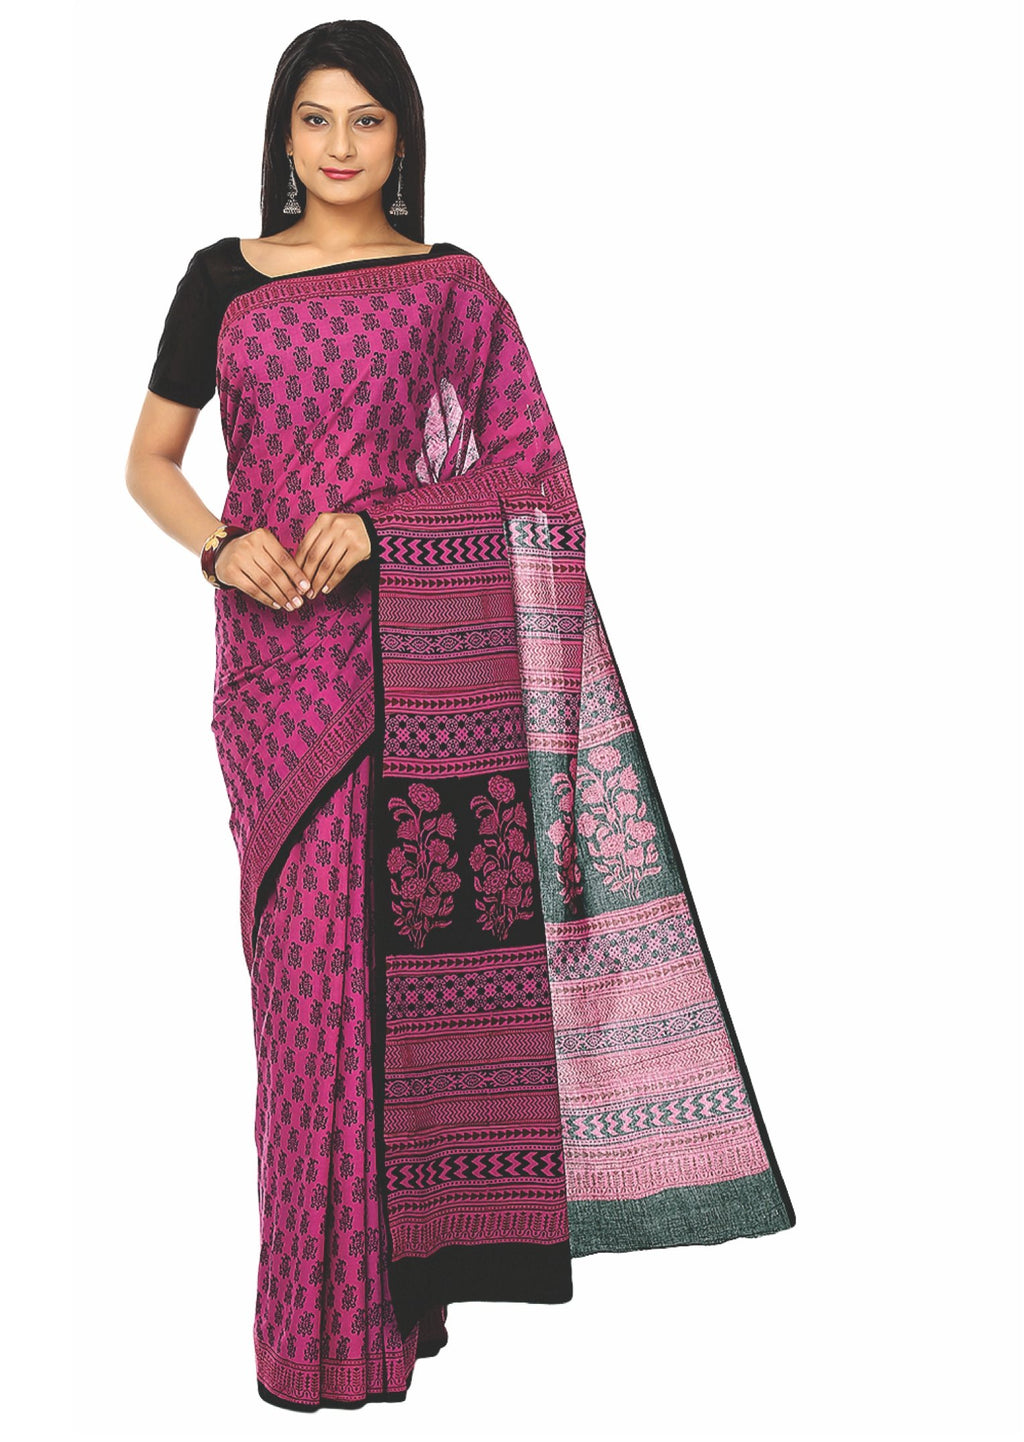 Kalakari India Pink Bagh Handblock Print Handcrafted Cotton Saree-Saree-Kalakari India-ZIBASA0007-Bagh, Cotton, Geographical Indication, Hand Blocks, Hand Crafted, Heritage Prints, Natural Dyes, Sarees, Sustainable Fabrics-[Linen,Ethnic,wear,Fashionista,Handloom,Handicraft,Indigo,blockprint,block,print,Cotton,Chanderi,Blue, latest,classy,party,bollywood,trendy,summer,style,traditional,formal,elegant,unique,style,hand,block,print, dabu,booti,gift,present,glamorous,affordable,collectible,Sari,Sare